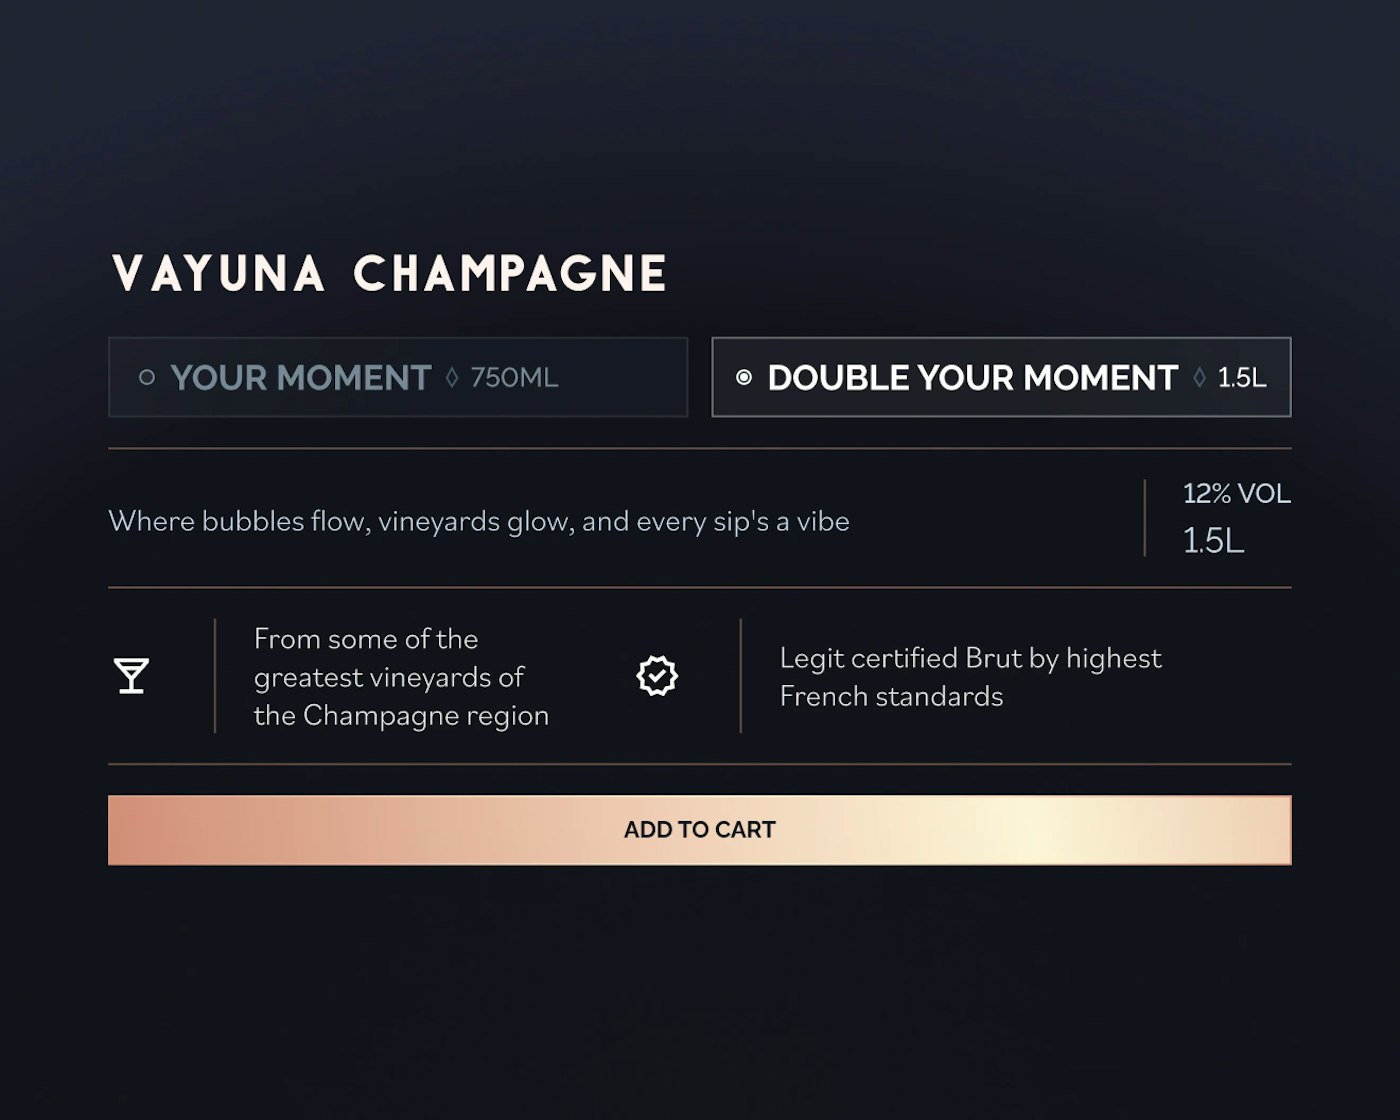 Product selection interface for VAYUNA Champagne featuring options 'YOUR MOMENT' at 750ML and 'DOUBLE YOUR MOMENT' at 1.5L. Descriptive text highlights fruity flavors, craftsmanship, and social sharing. Icons denote the champagne's origin as Made in France and its certification as Brut according to French standards. An 'ADD TO CART' button is prominently displayed below.